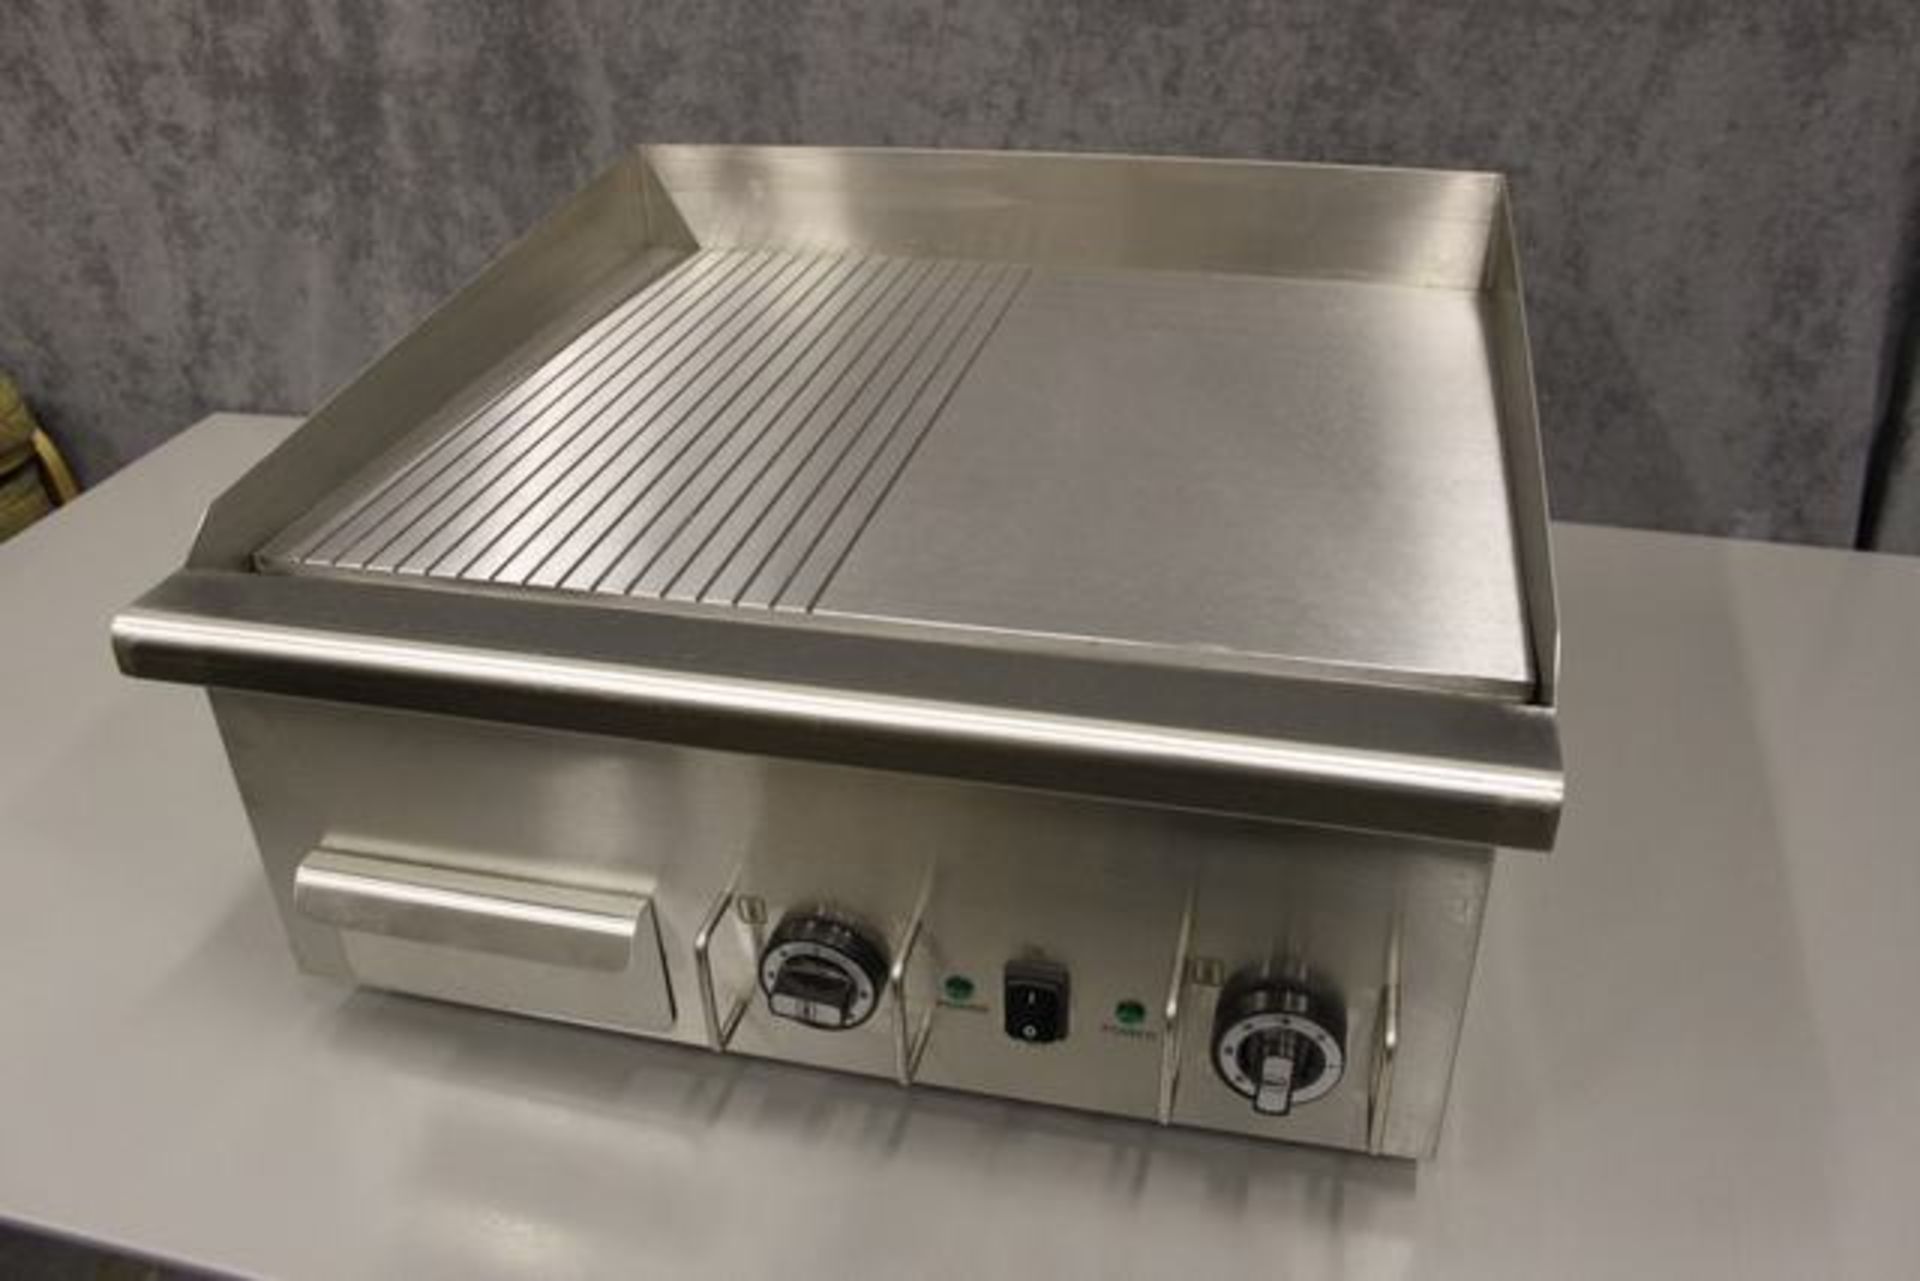 Electric griddle CE marked all stainless steel body polished plate part smooth part ribbed which